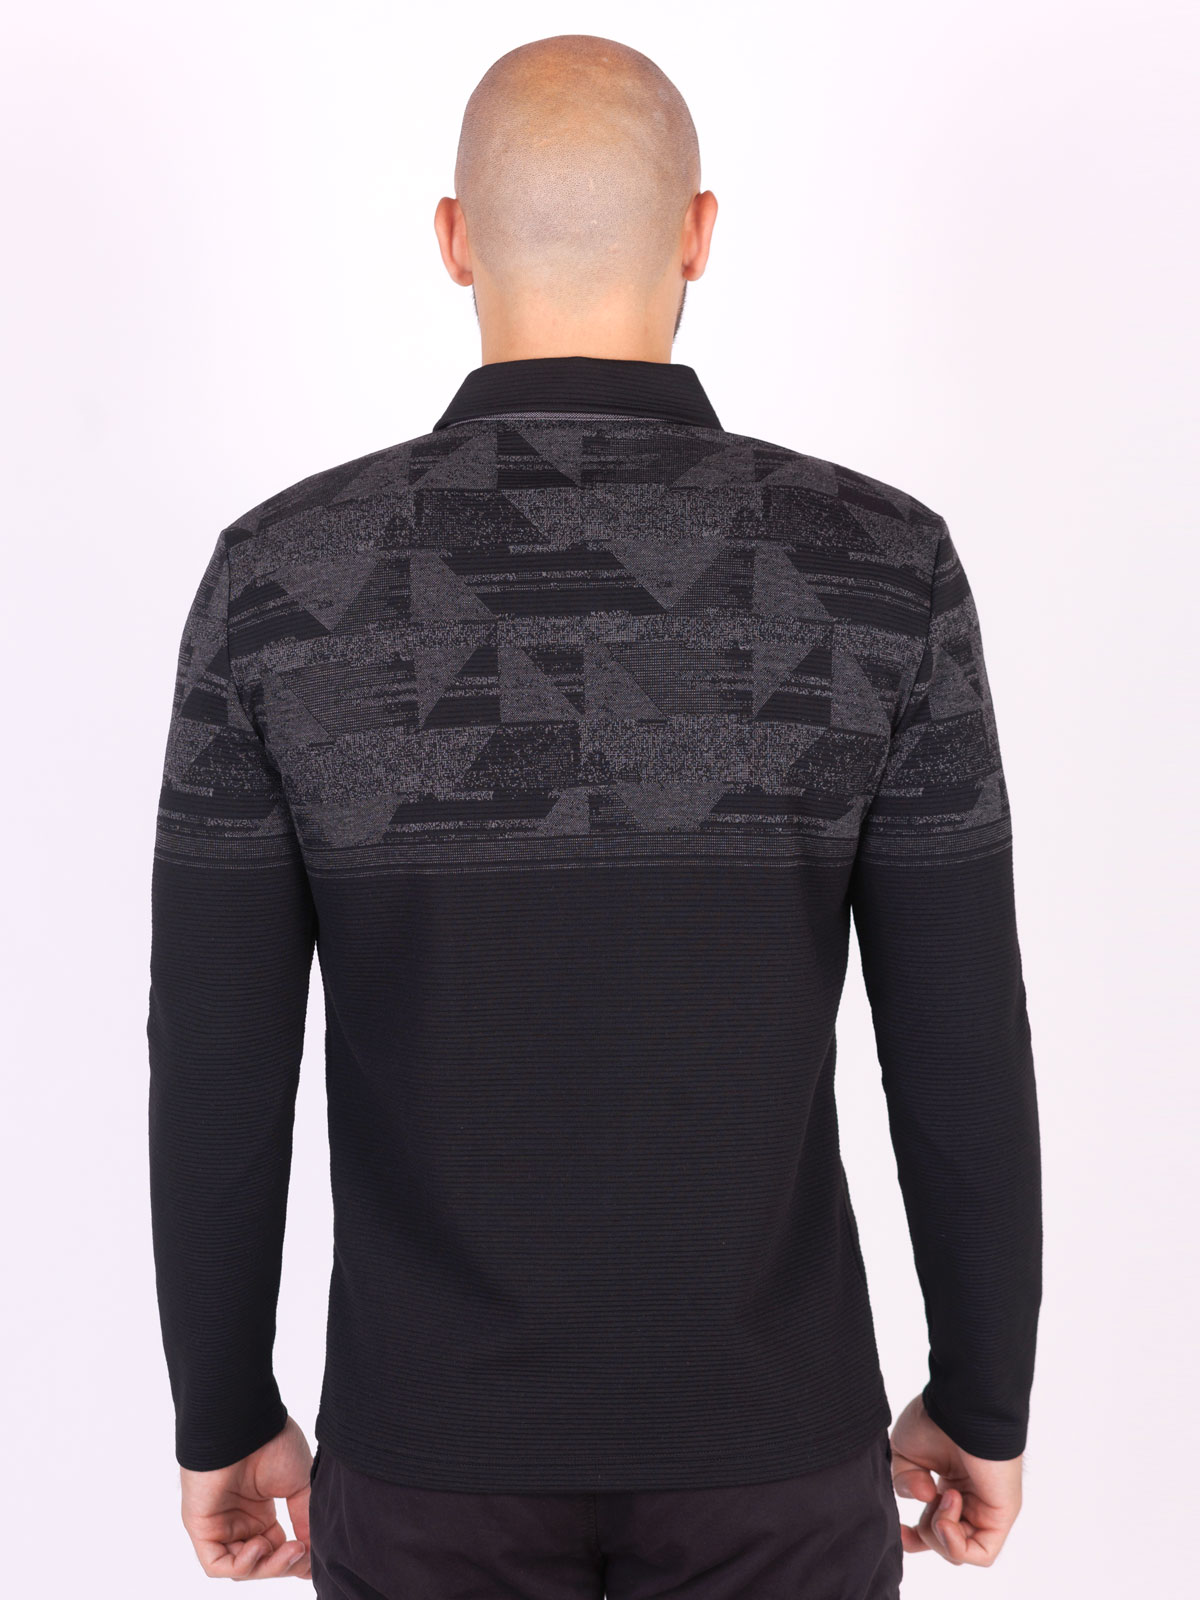 Blouse in black with figures - 18263 € 37.68 img2